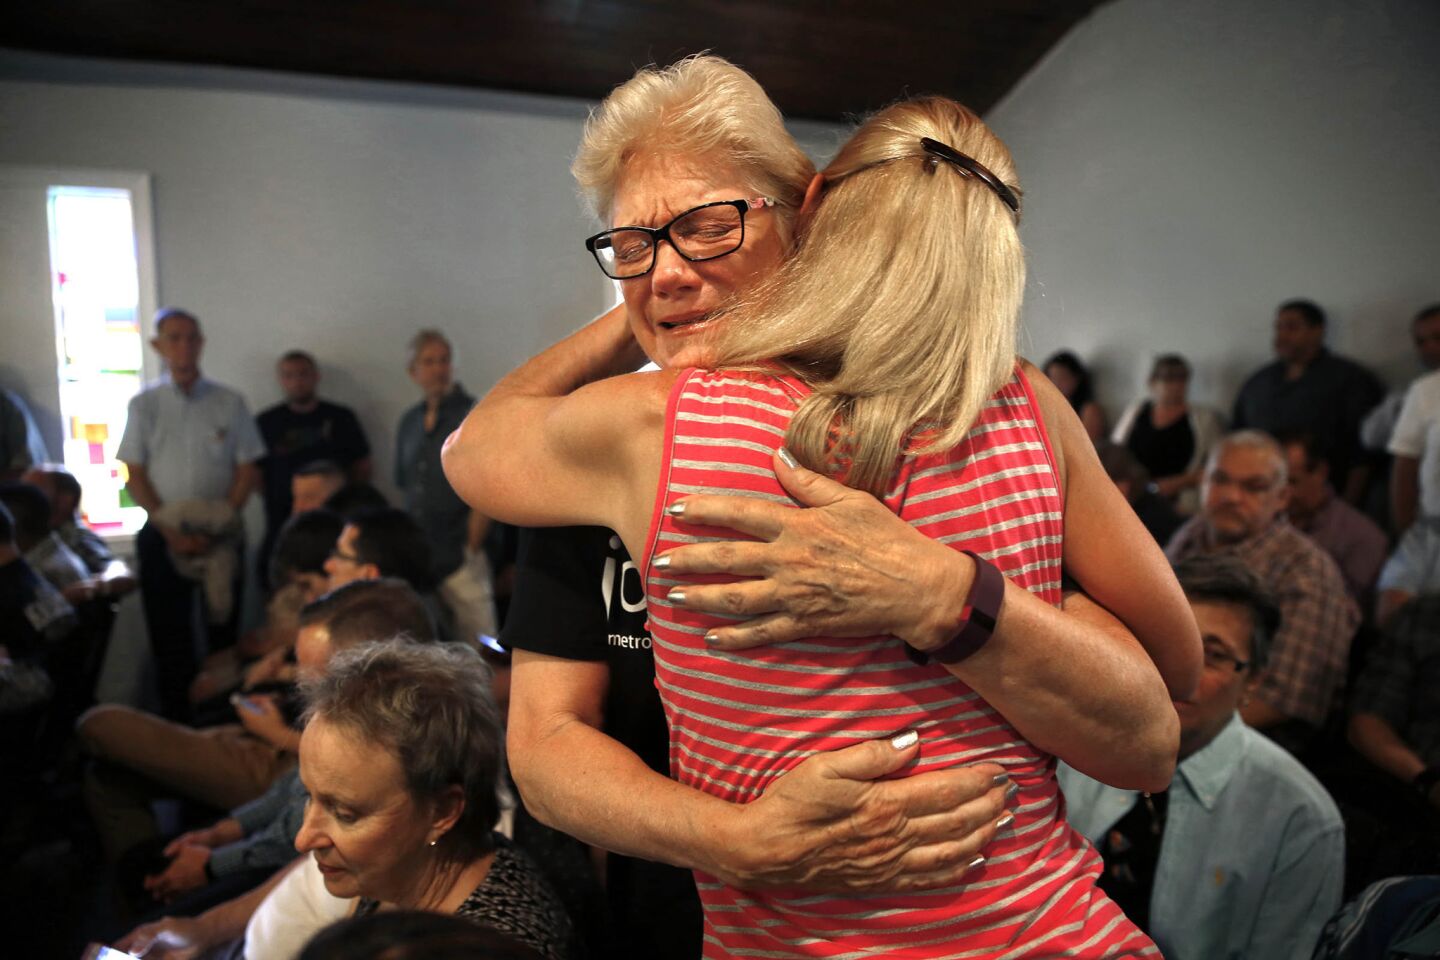 Susan Stephens, right, gets a hug from Karen Castelloes before a vigil and prayer service is held at Joy Meropolitan Community Church very close to Pulse nightclub.